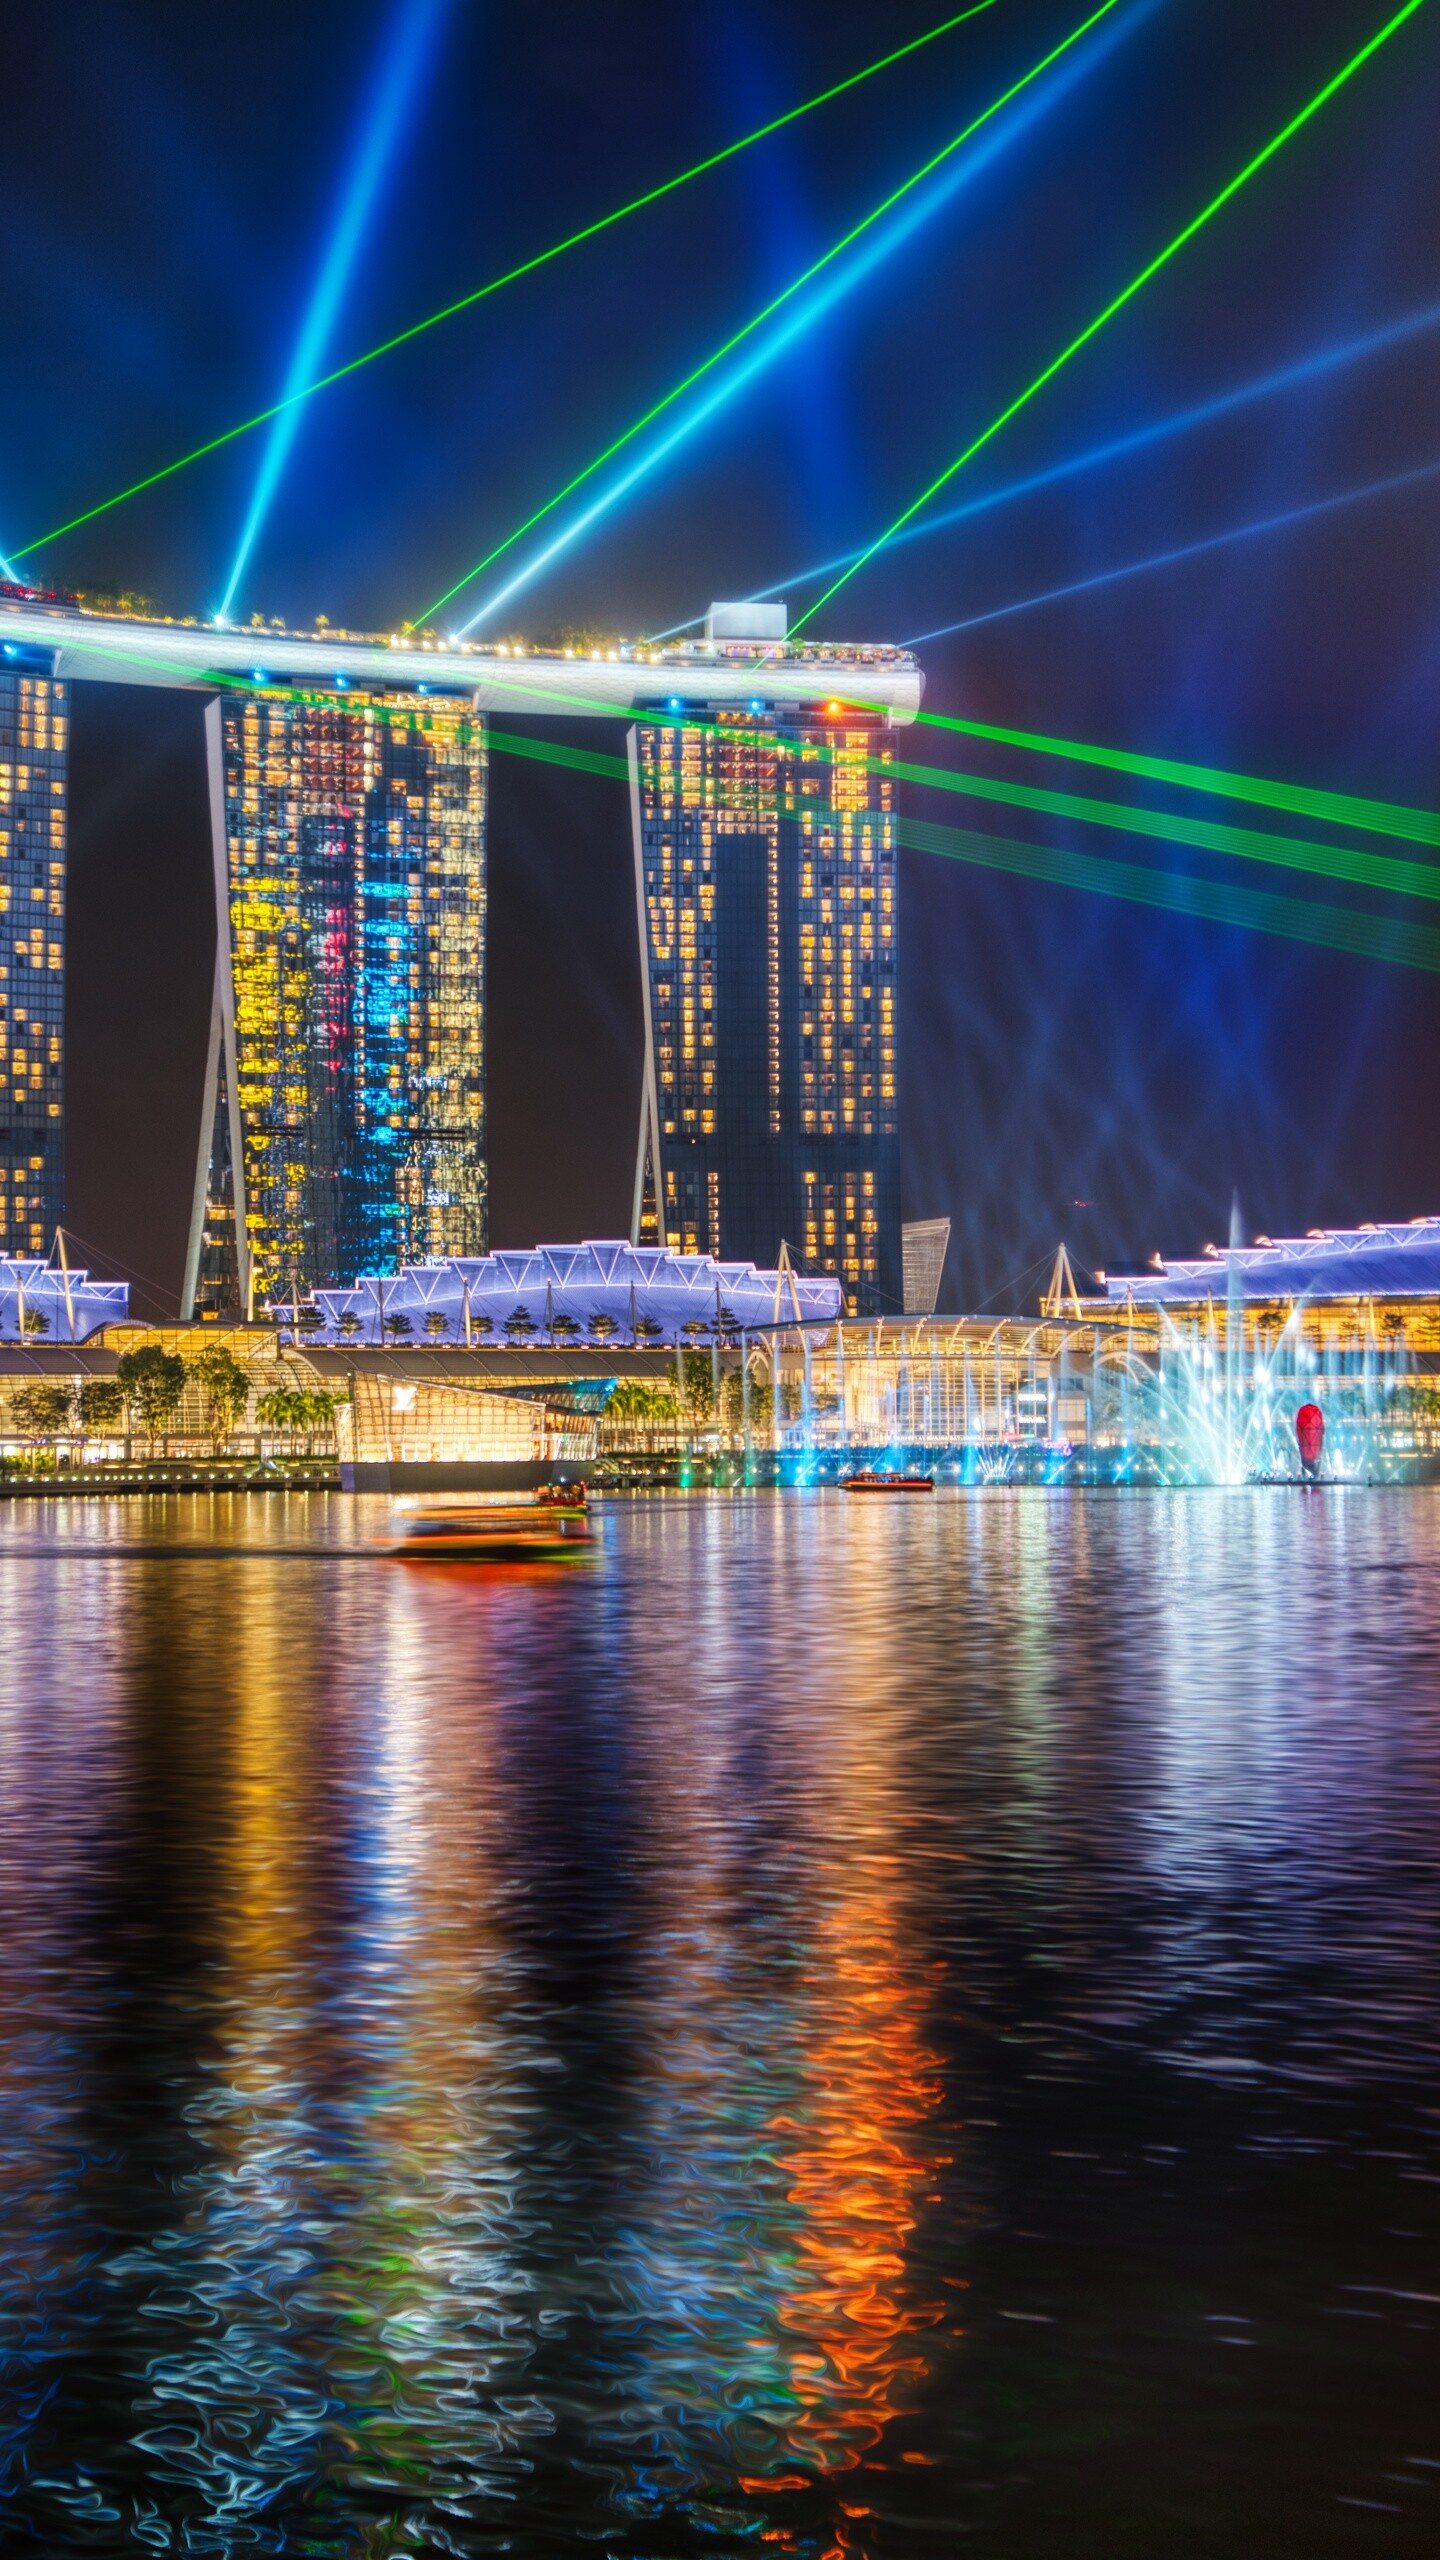 Singapore: Marina Bay Sands, An integrated resort notable for transforming Singapore's city skyline. 1440x2560 HD Wallpaper.